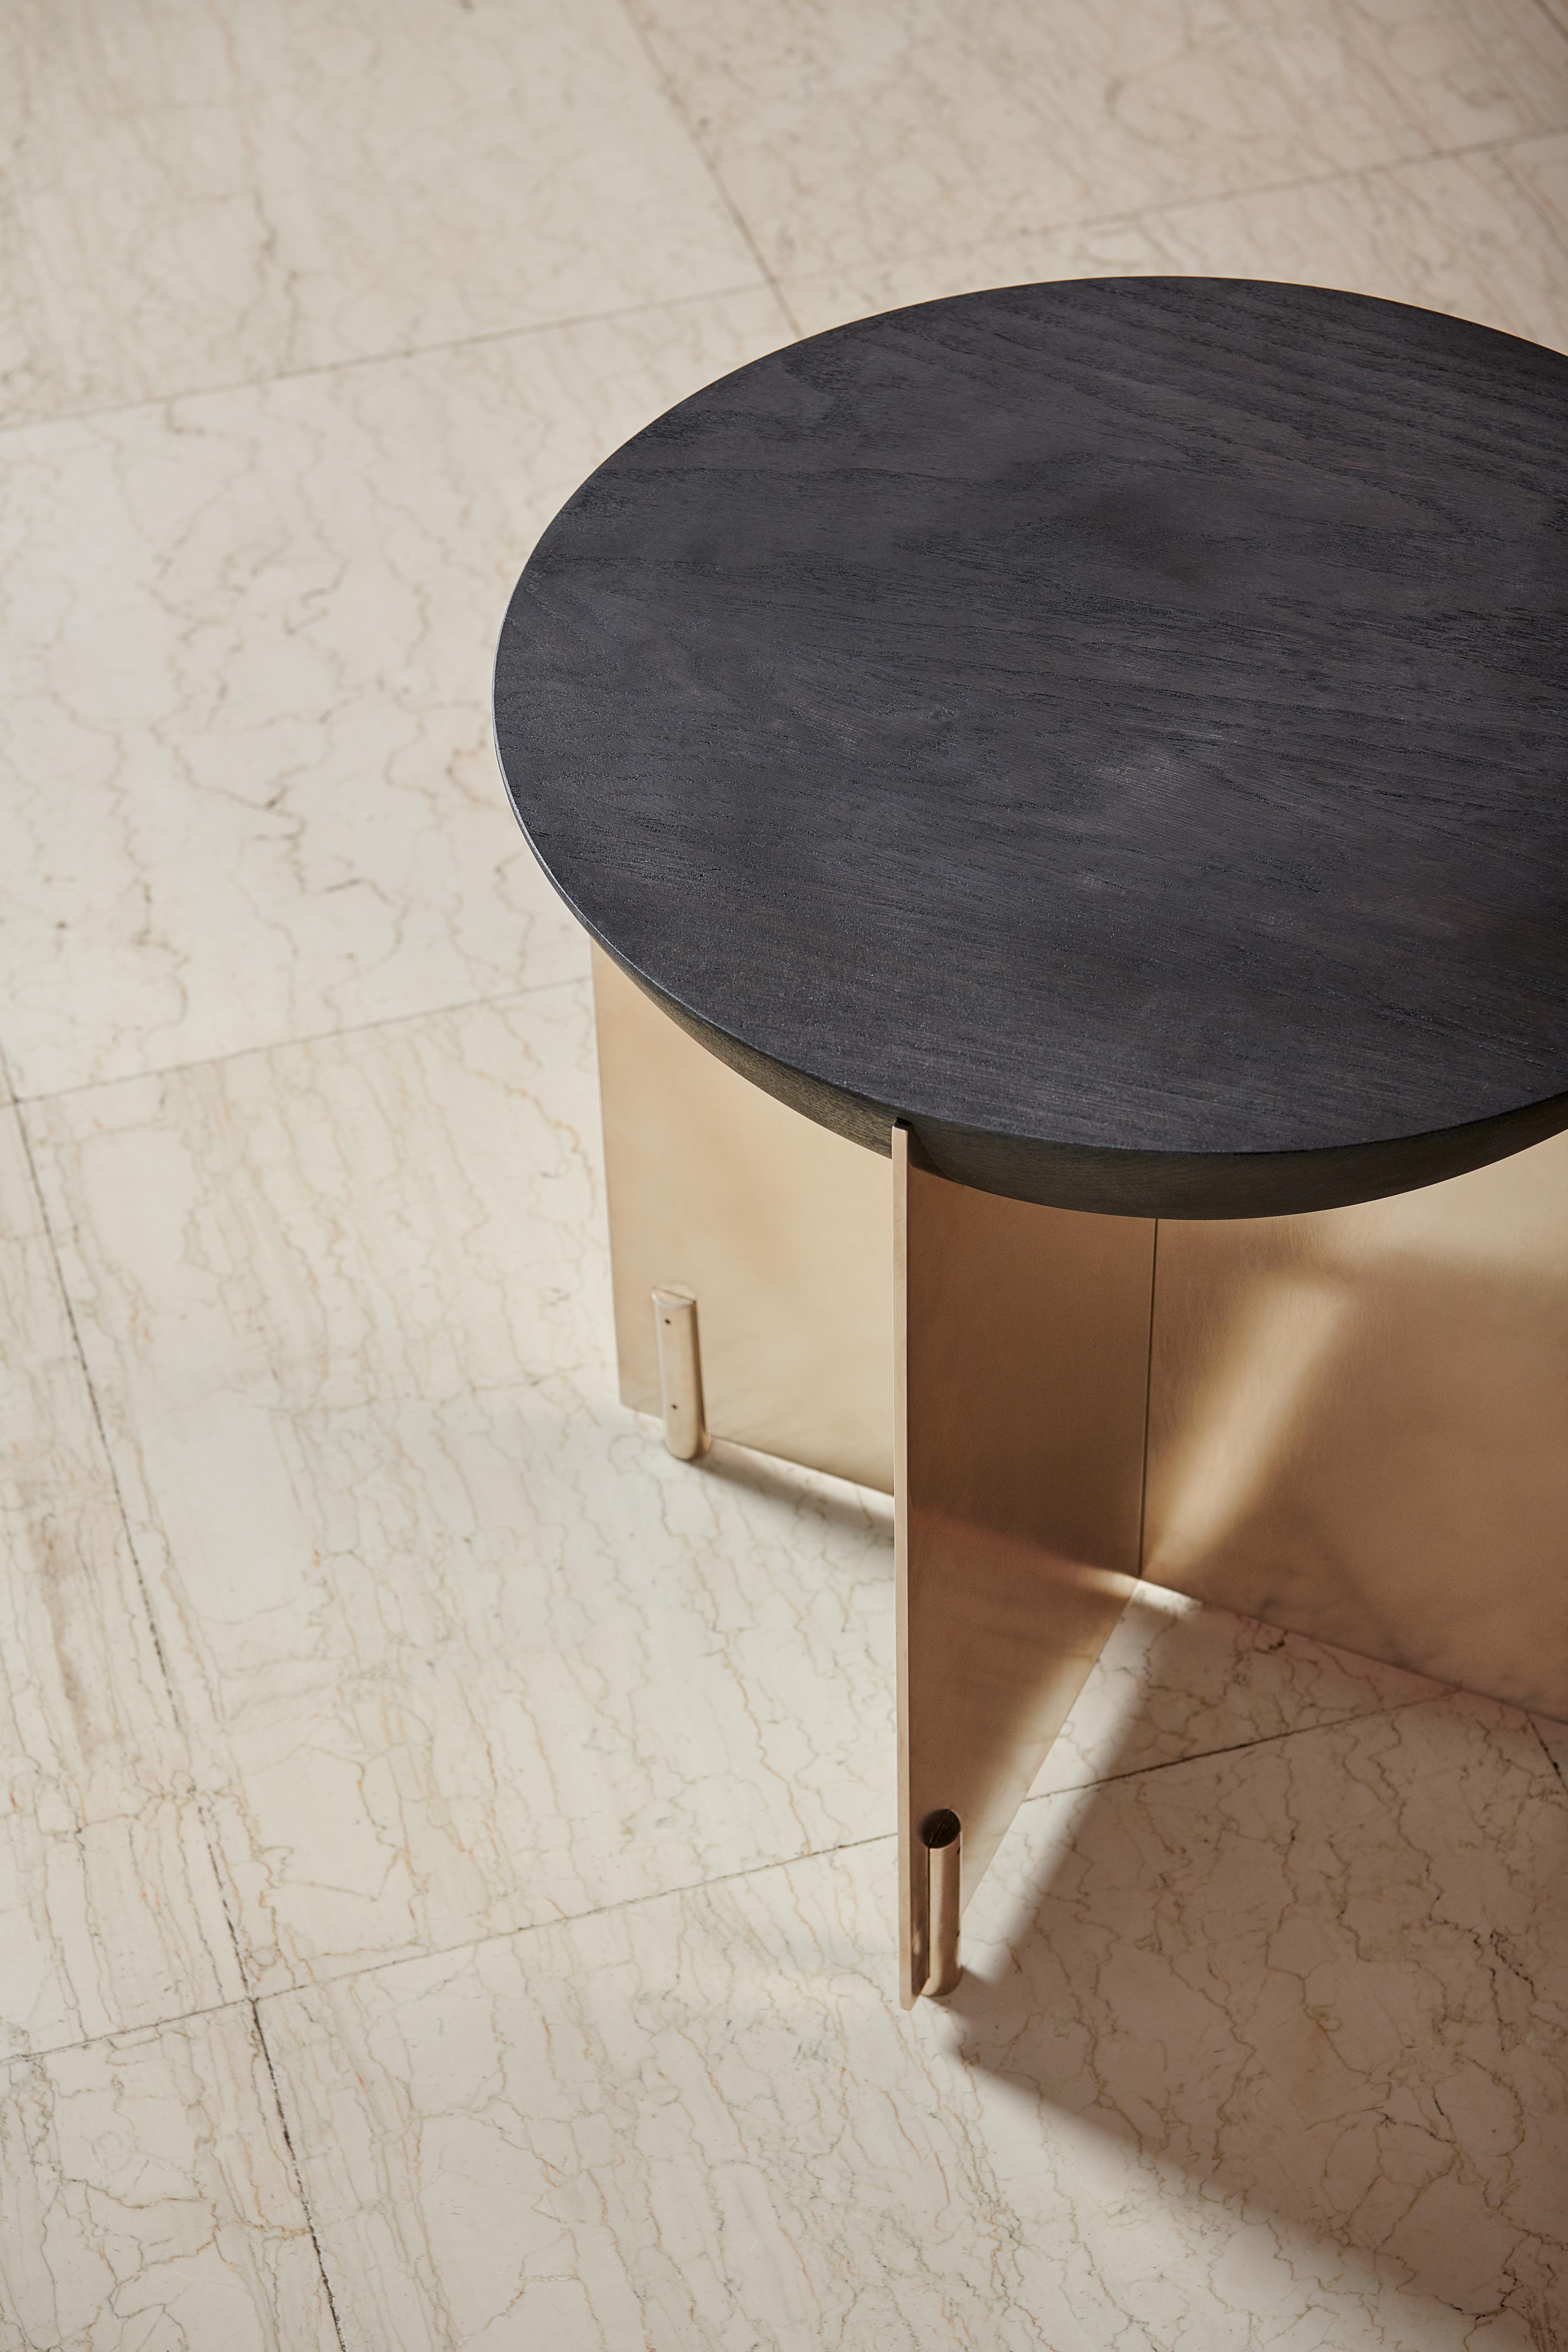 An extraordinary furniture piece.
A designer masterpiece.

Make room for a piece of functional art in your space. Discover the HIDDE oval-shaped stool that brings style to every room. Every one of our majestic stools has been handcrafted by various